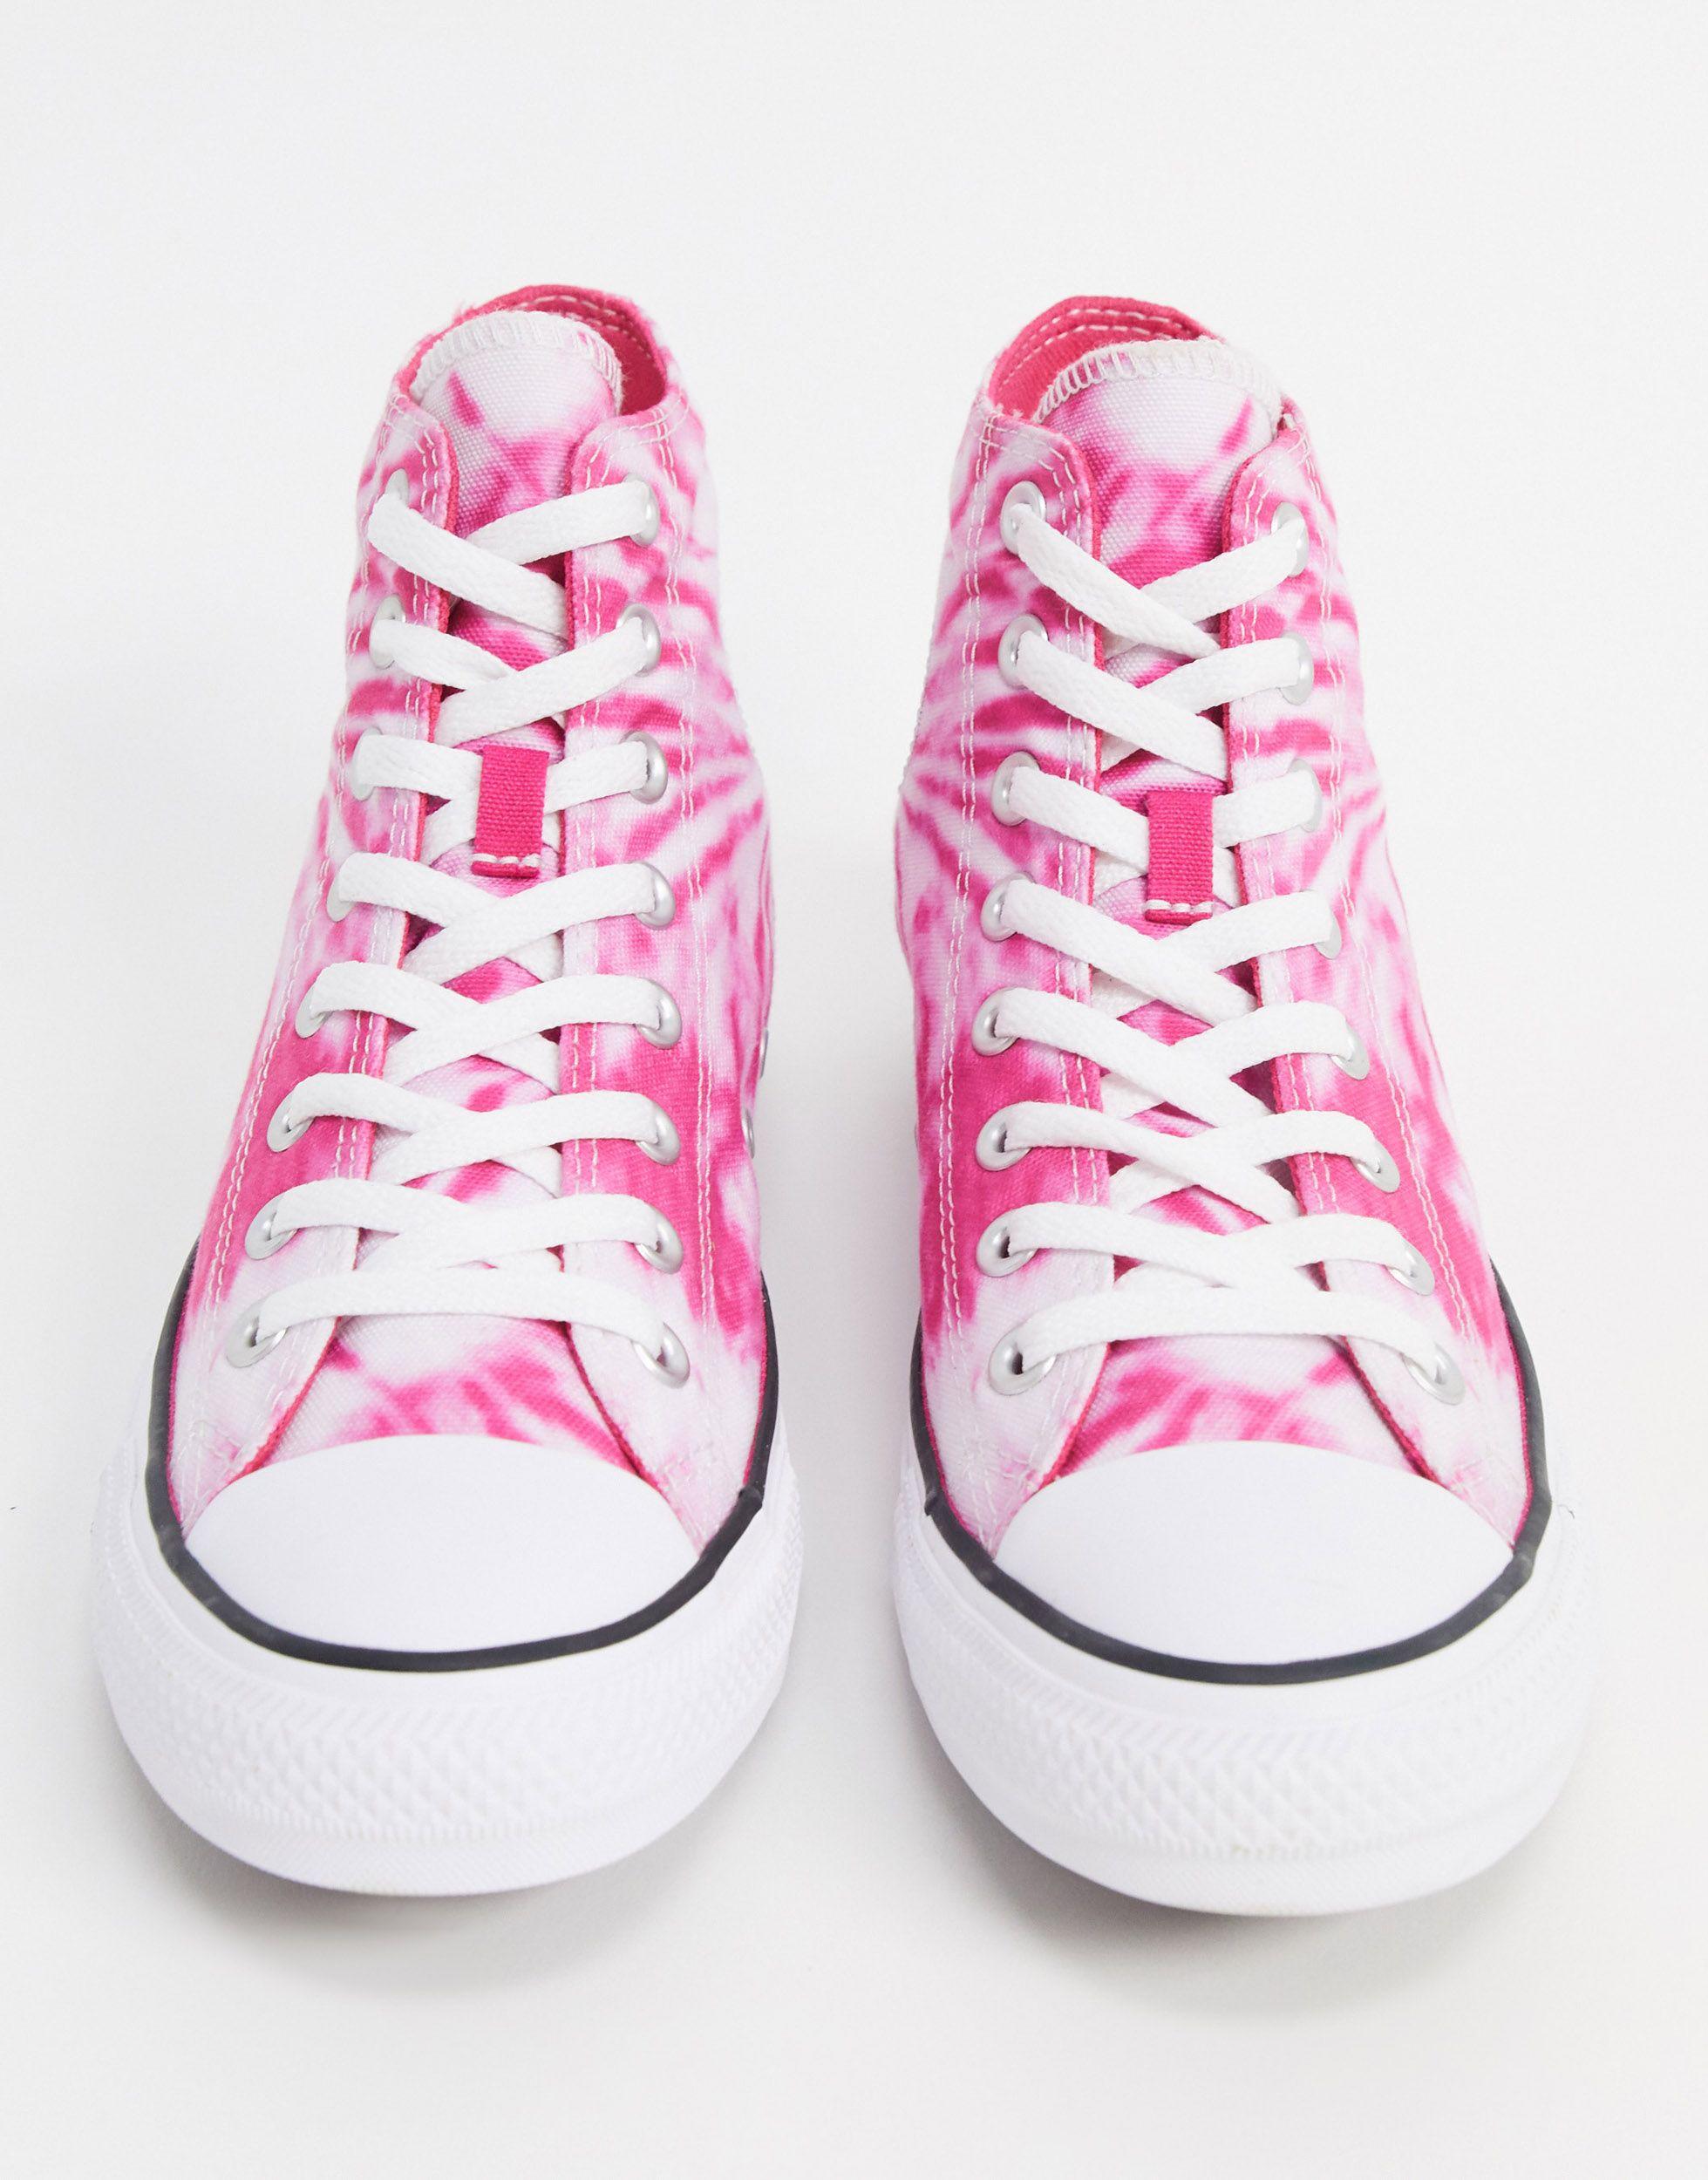 Converse Chuck Taylor All Star Hi Pink Tie Dye Trainers | Lyst UK